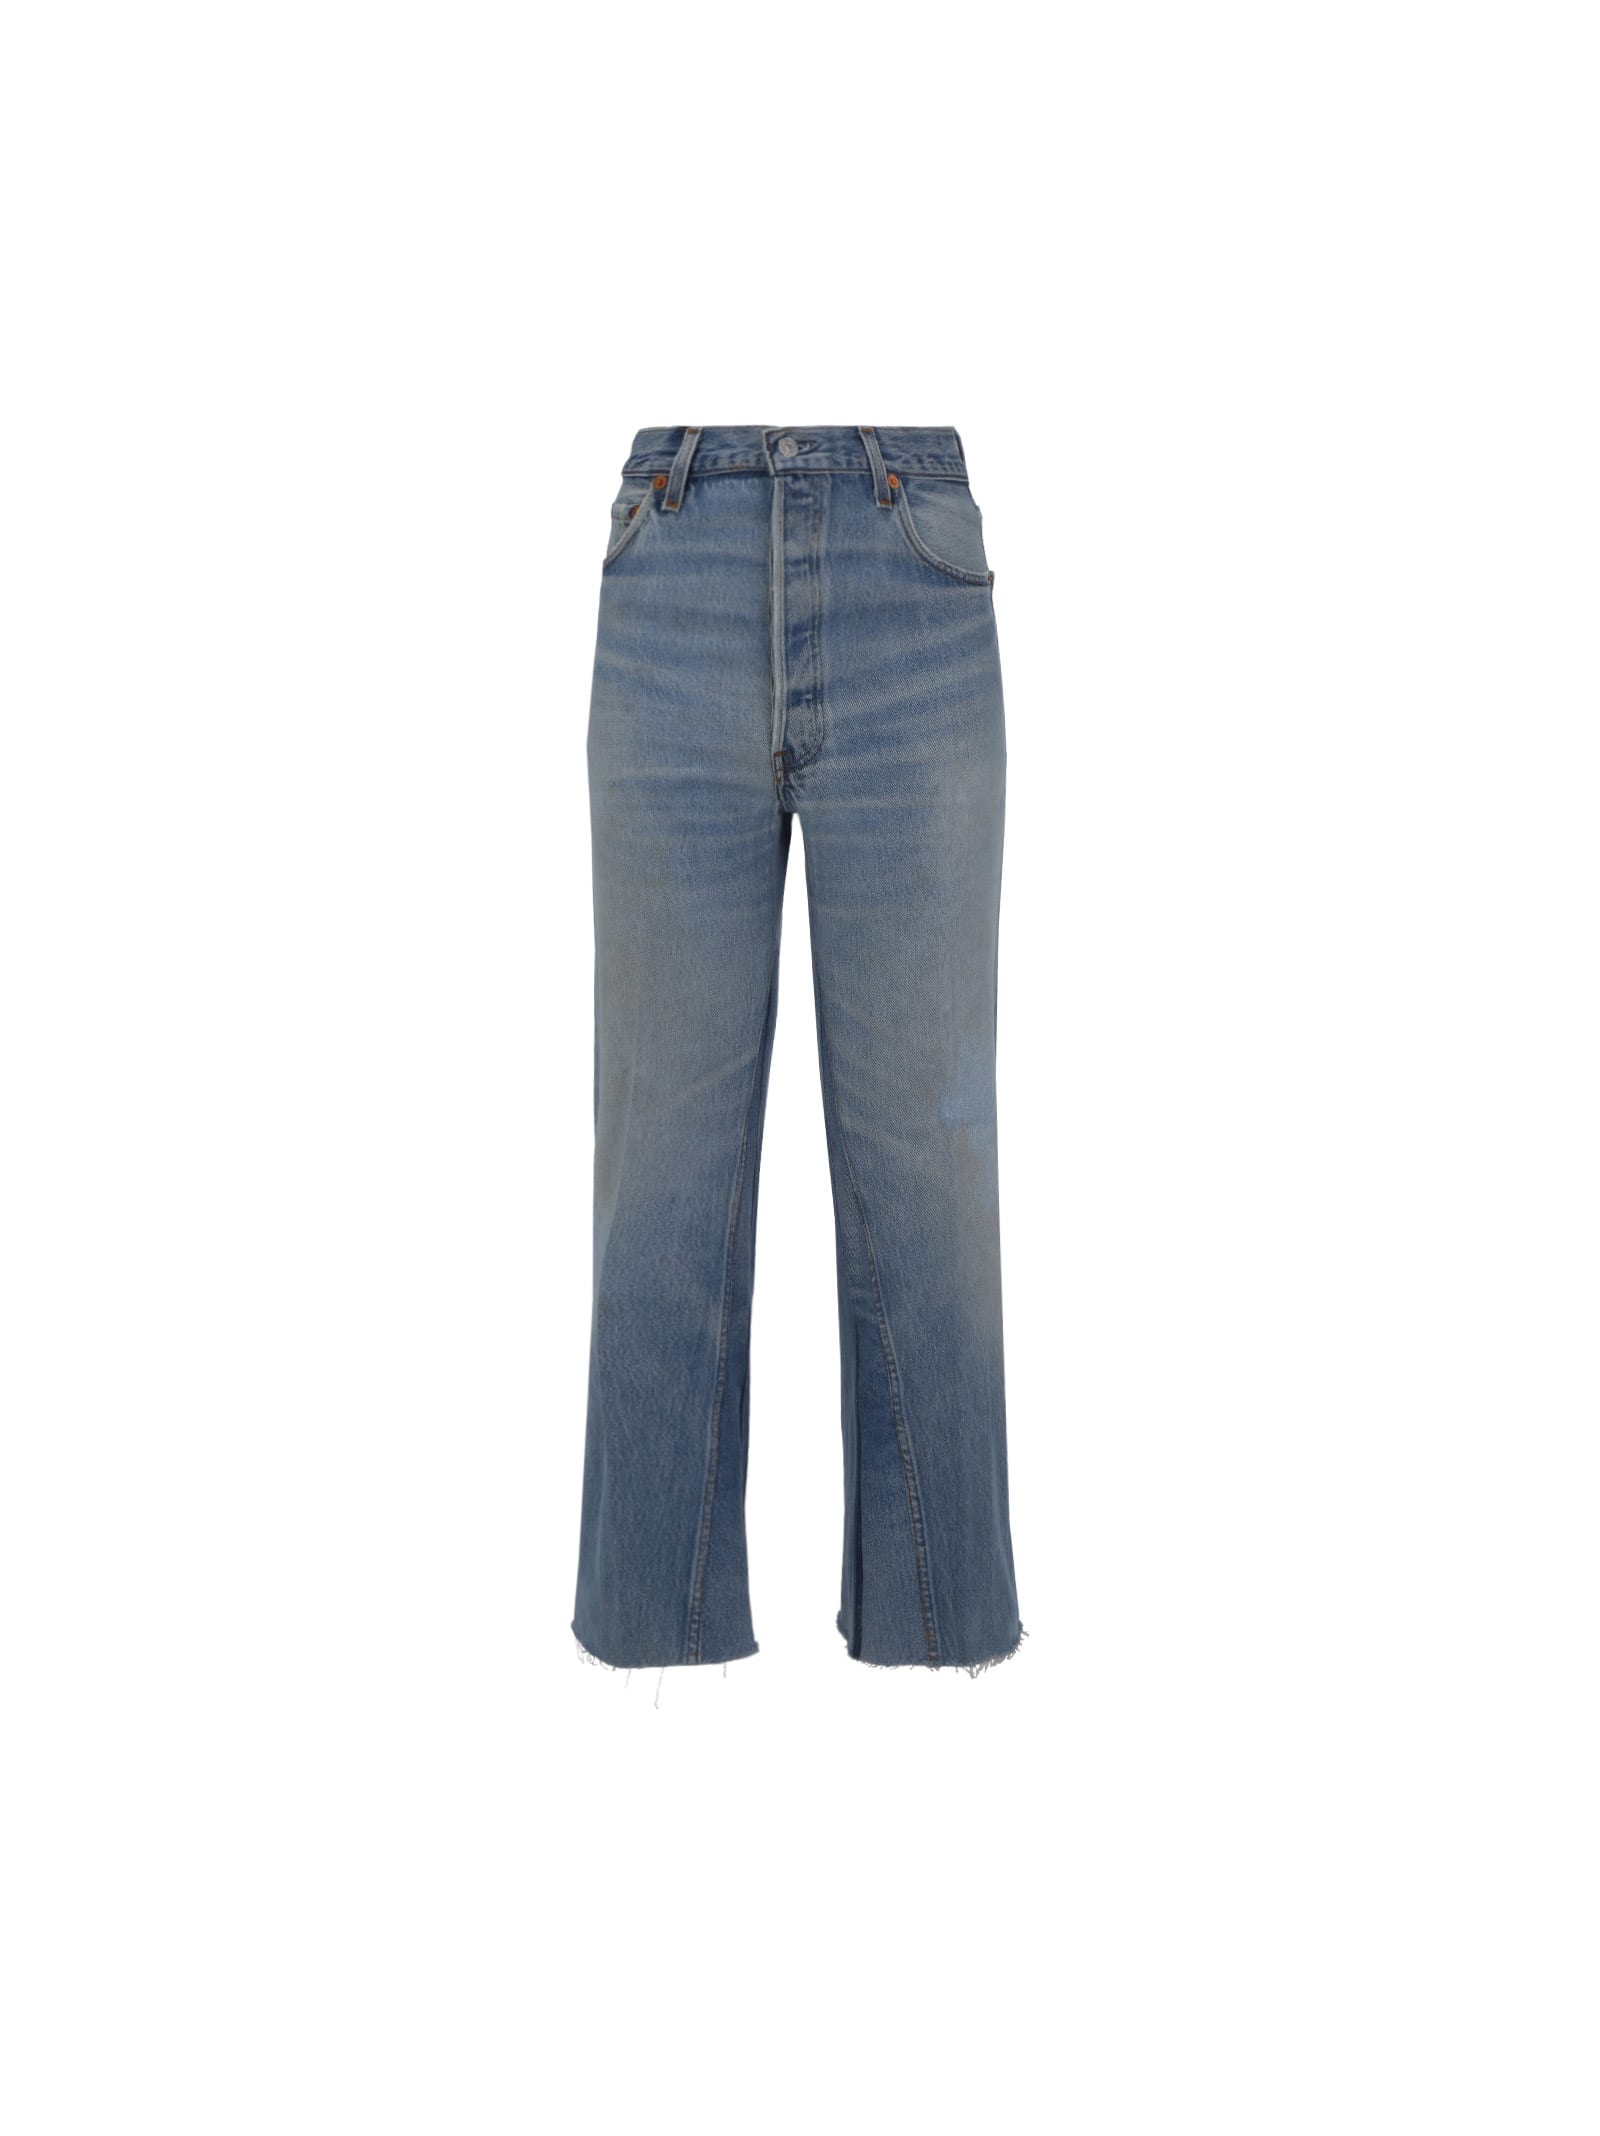 RE/DONE Levis High Rise Jeans